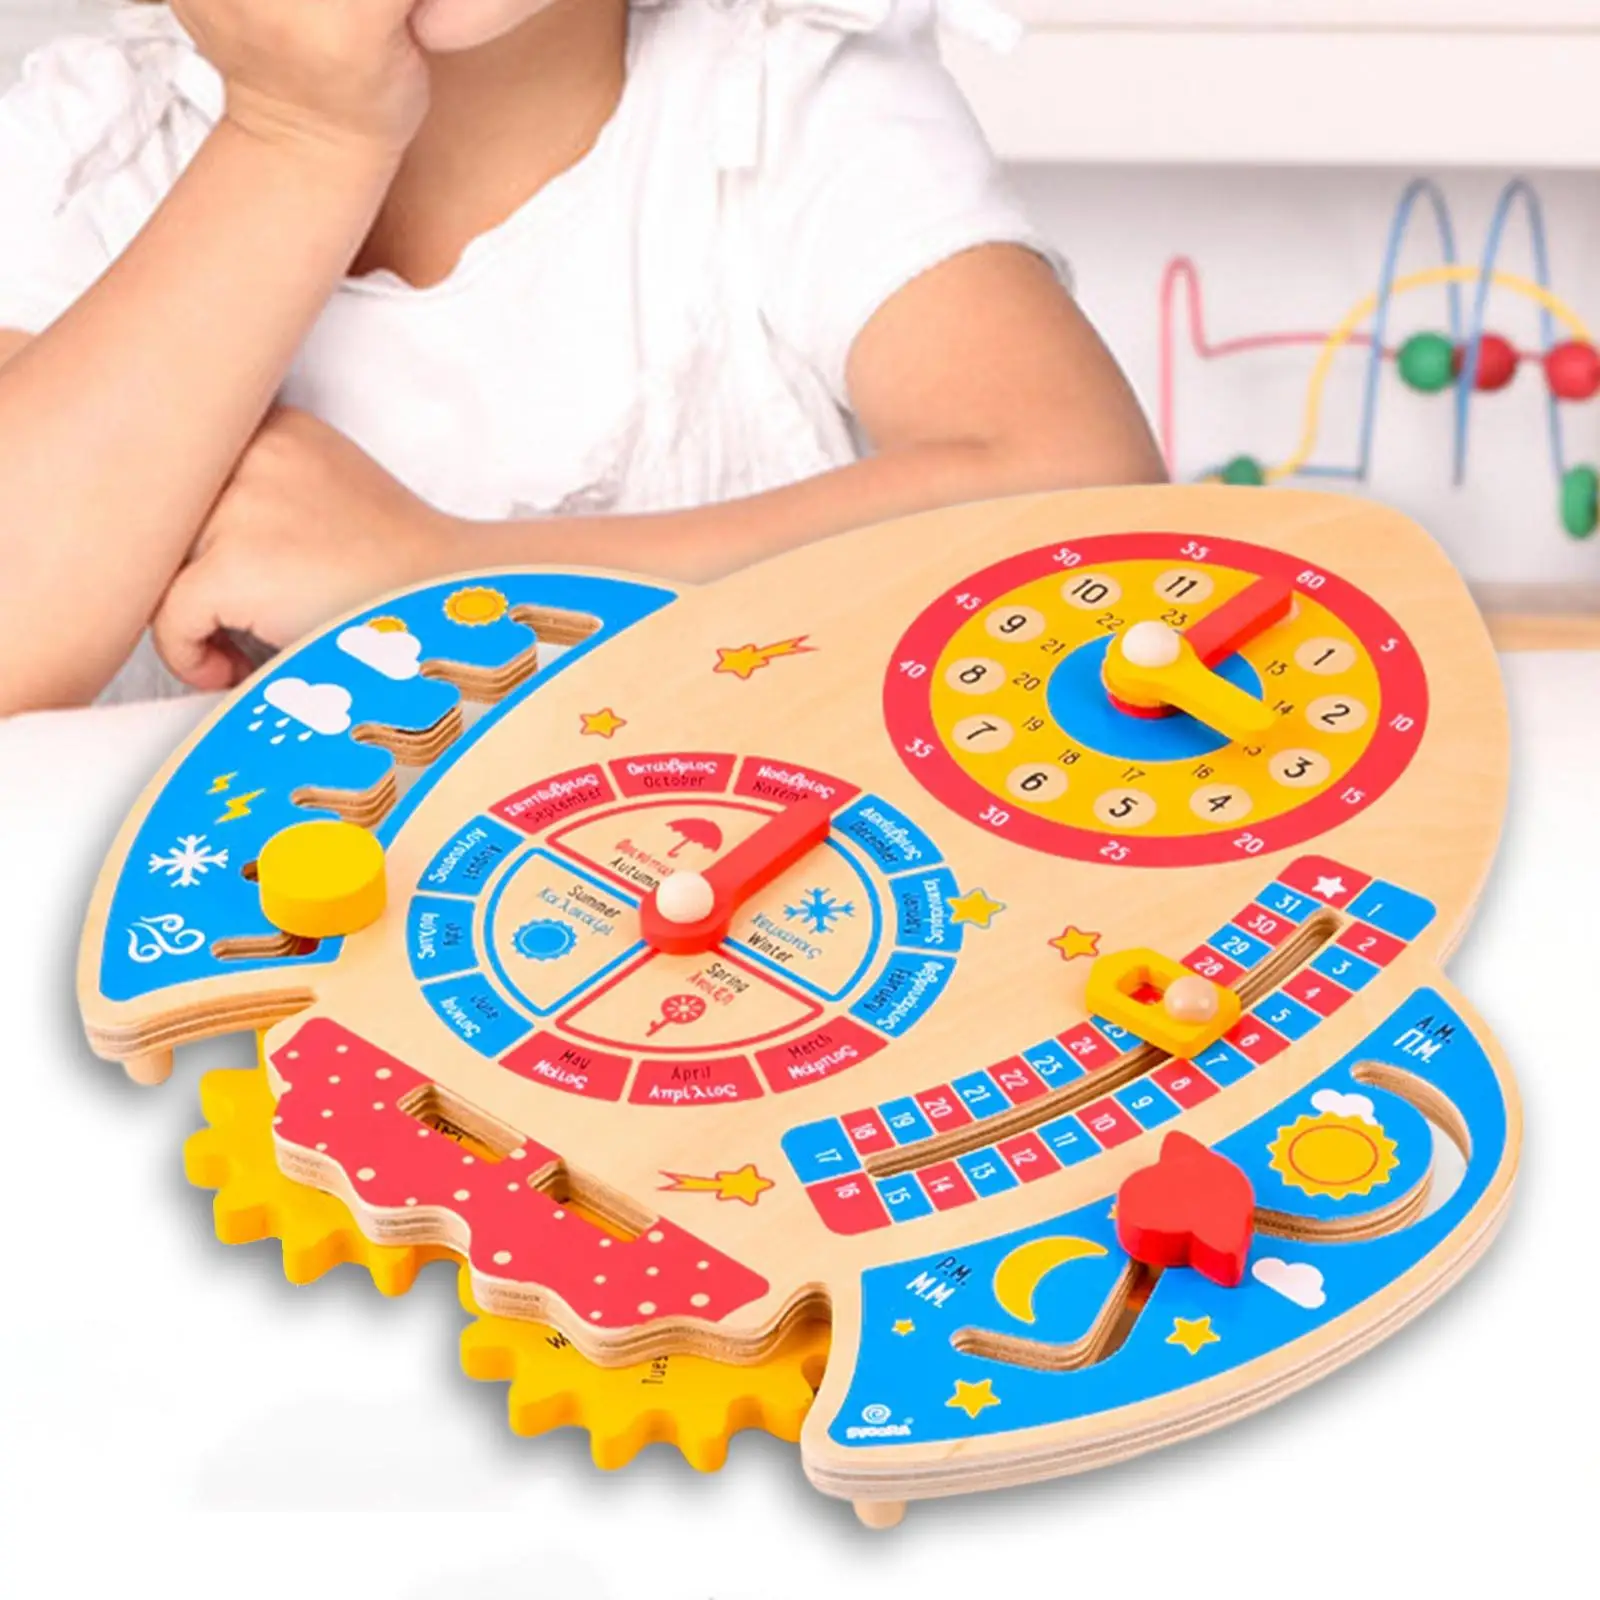 Wooden Calendar Board Toys Clock Math Toys for ChildrenBirthday Gifts